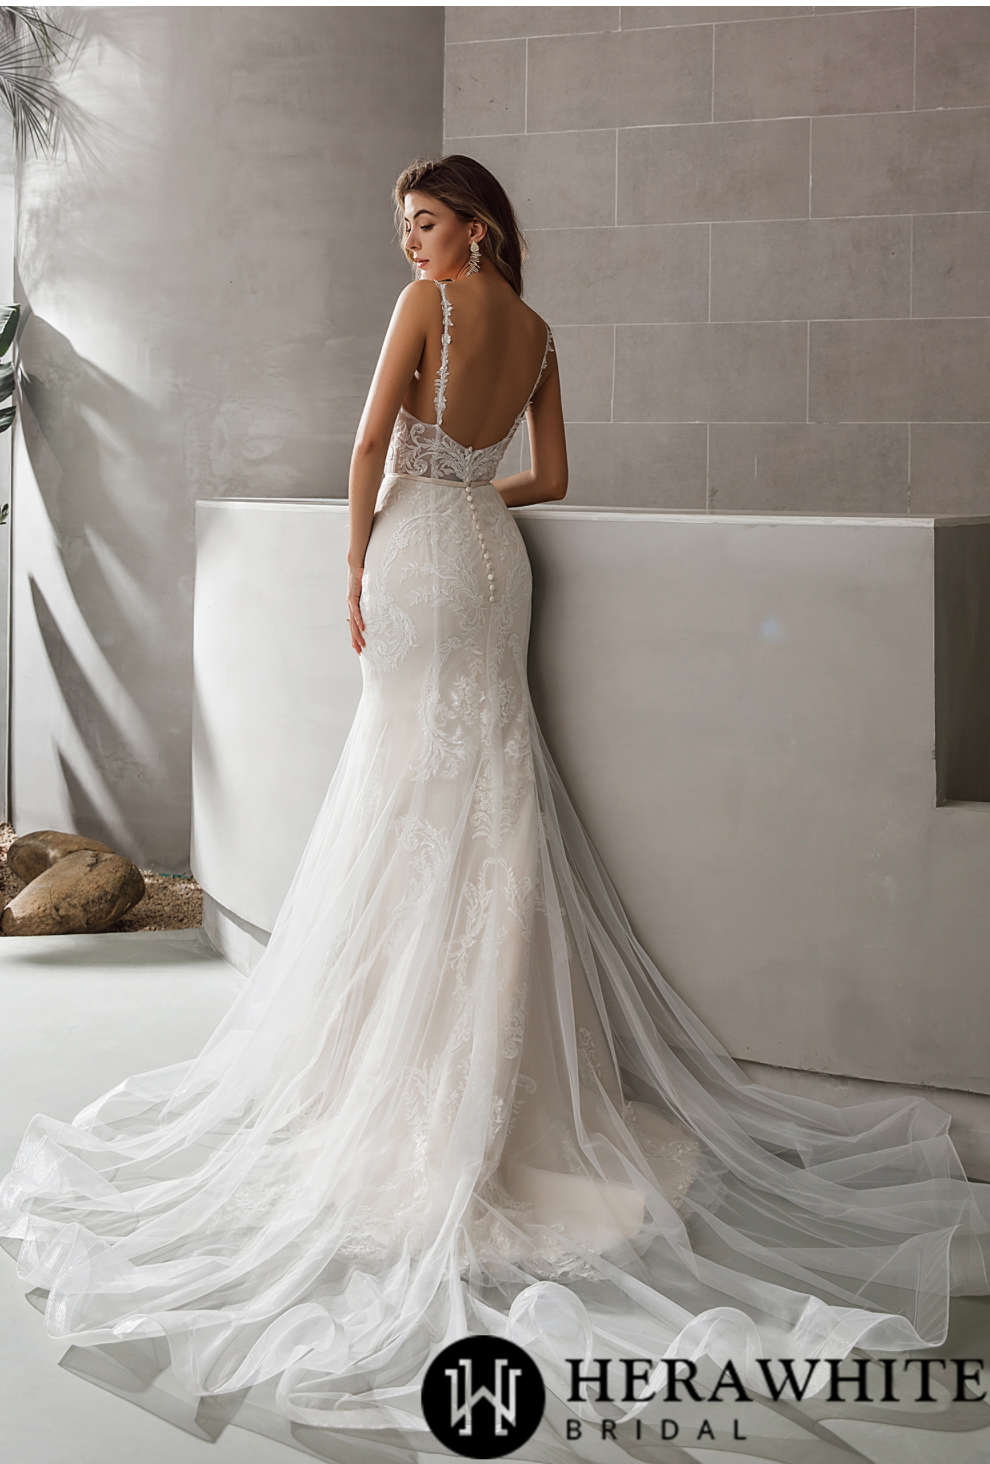 Geometric Lace Fit and Flare Bridal Gown With Sheer Train - Nolita Nicole